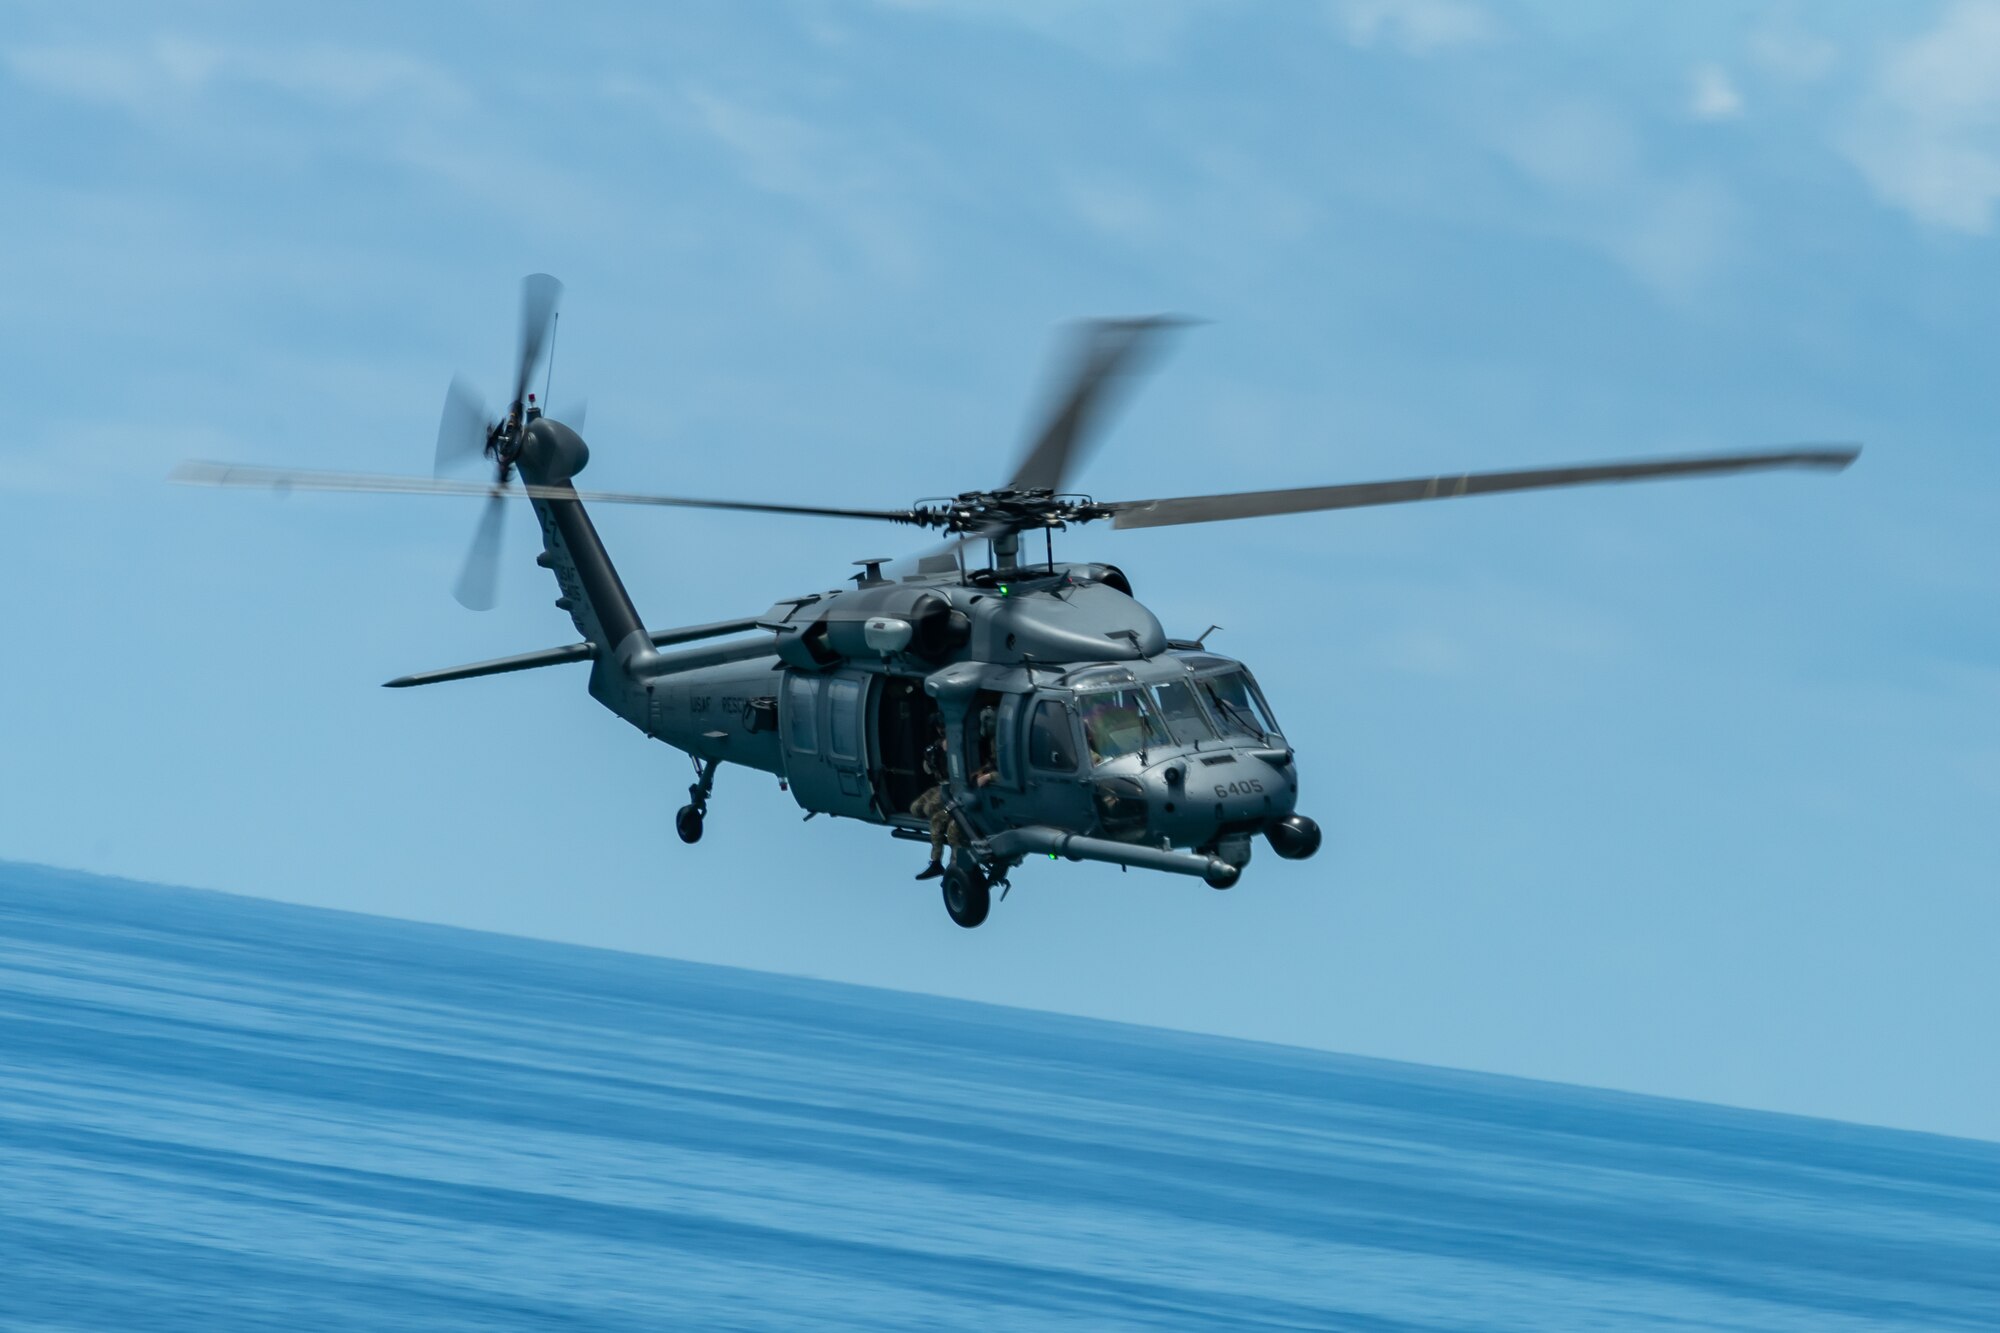 An HH-60G Pave Hawk from the 33rd Rescue Squadron flies during a training exercise, July 23, 2019, out of Kadena Air Base, Japan. The 33rd RQS has performed search, rescue, and recovery missions since 1952. (U.S. Air Force photo by Airman 1st Class Matthew Seefeldt)